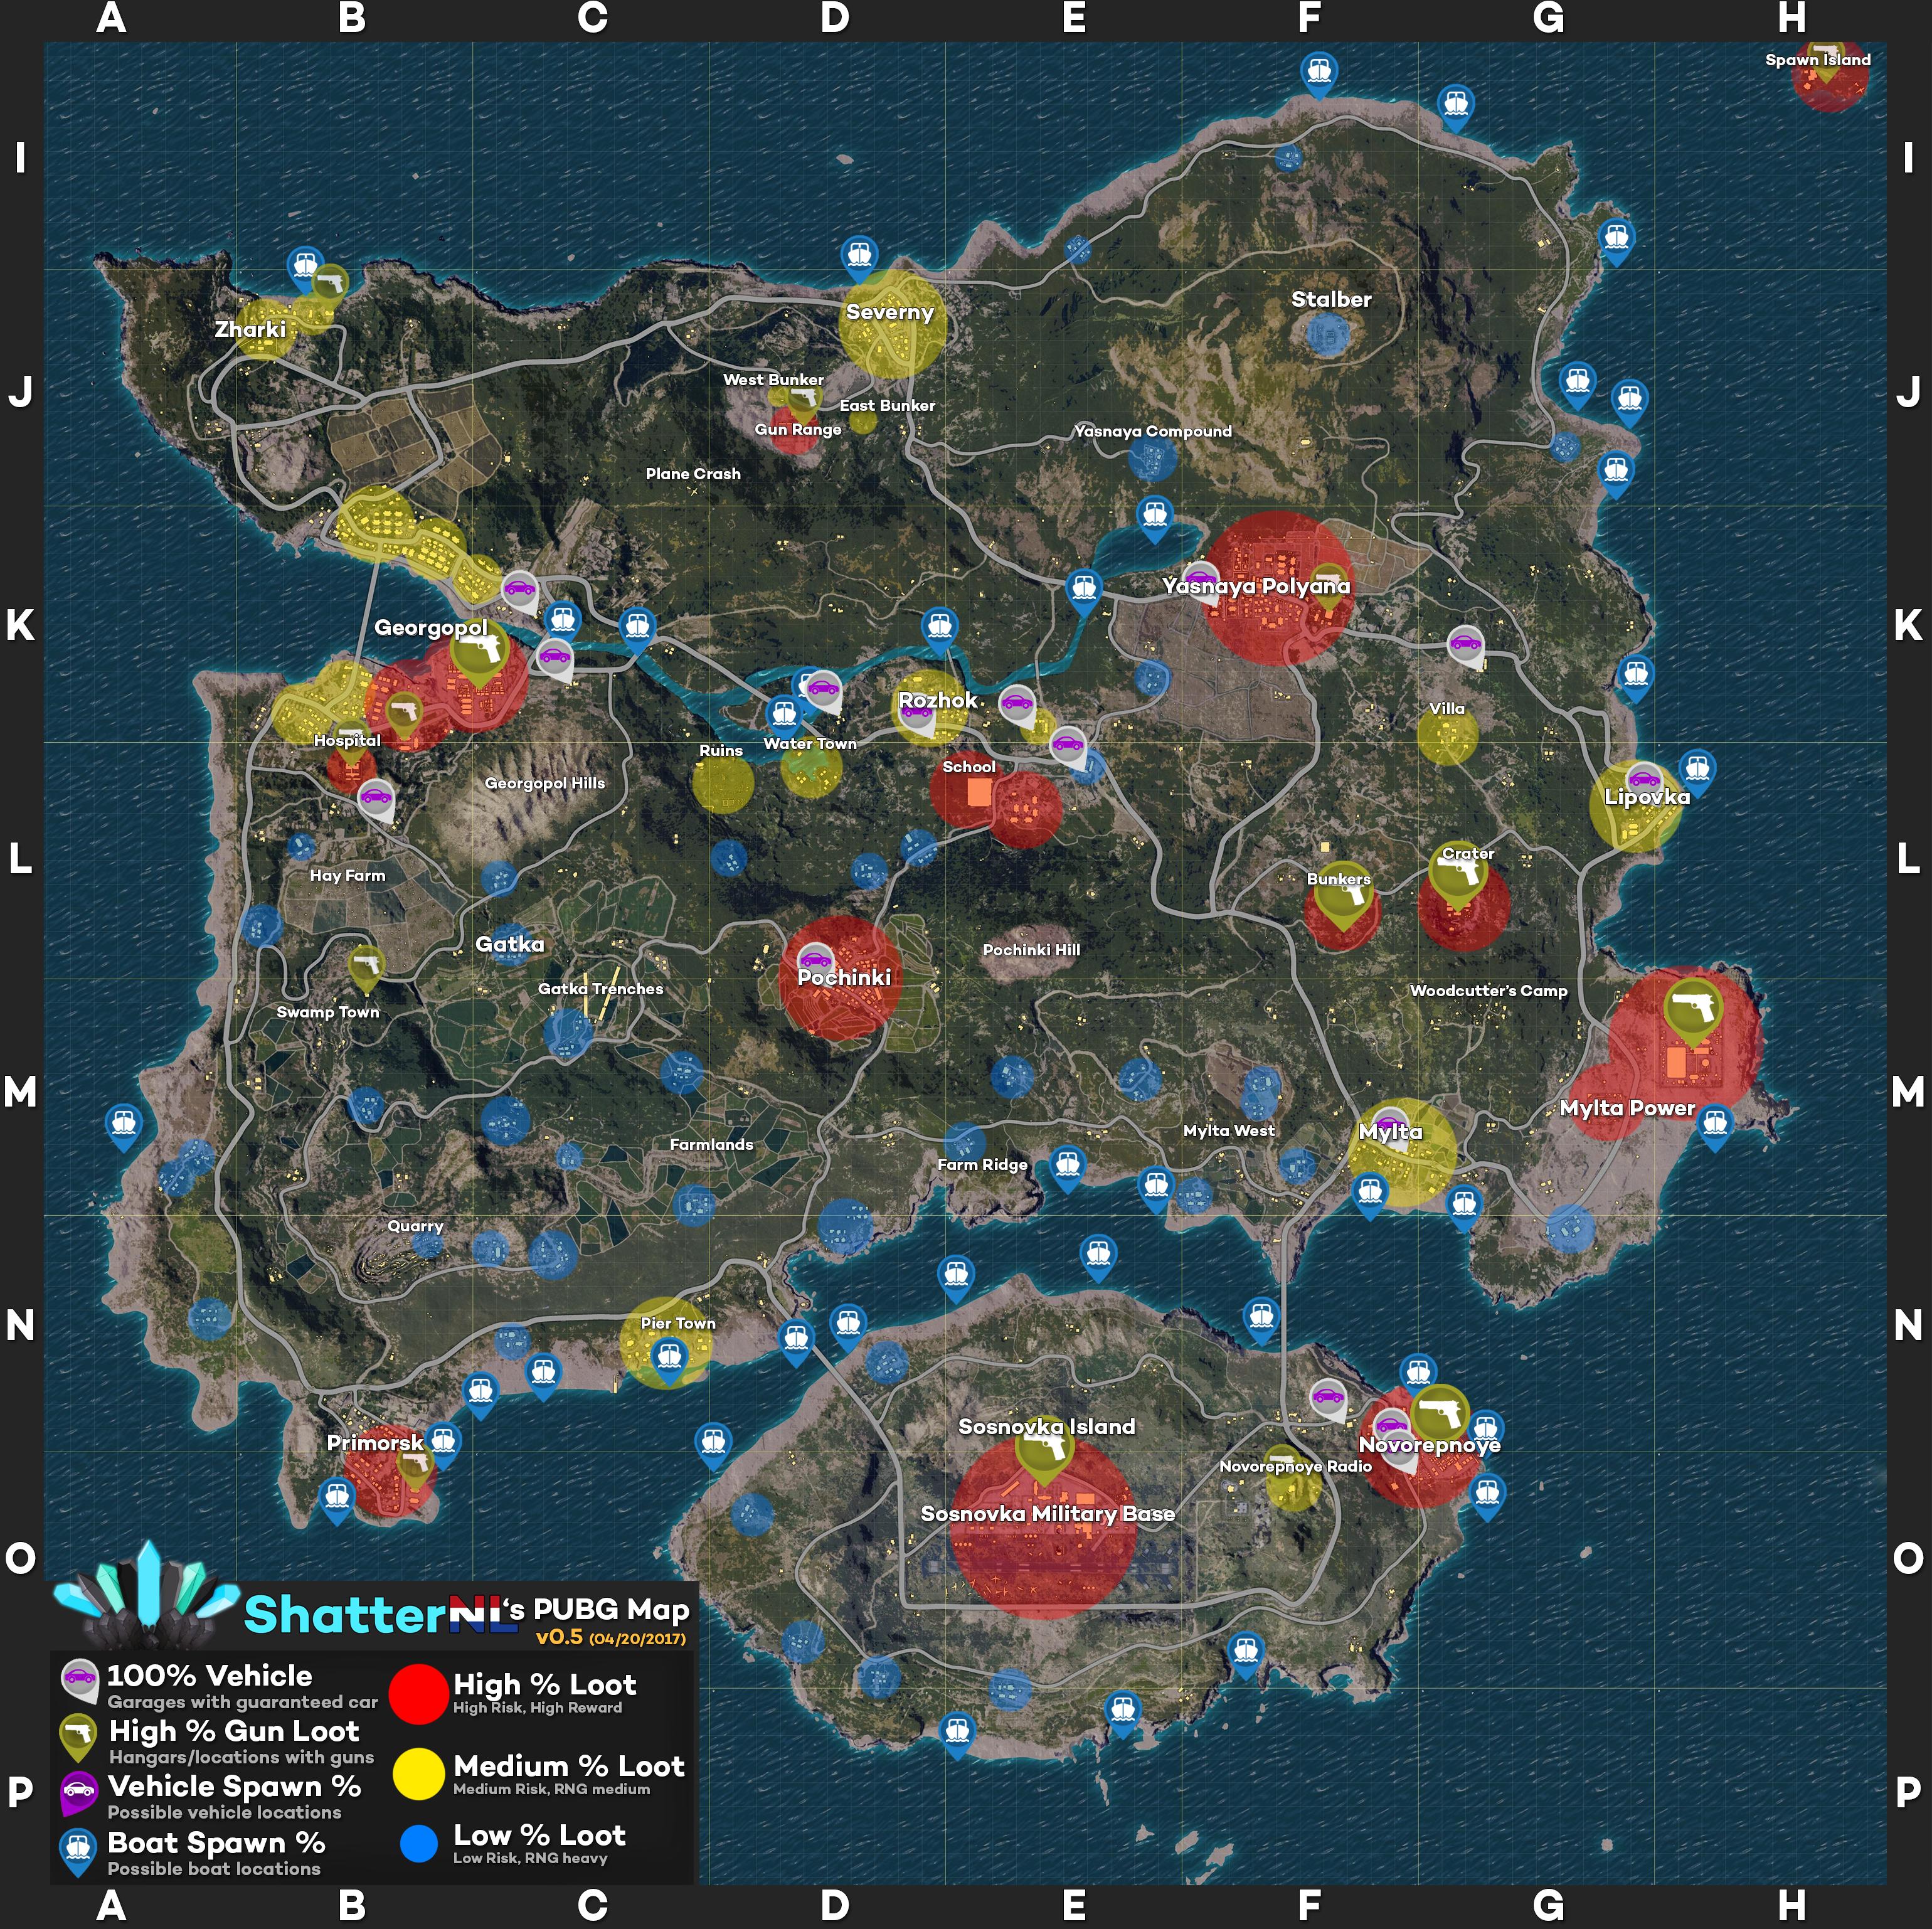 PLAYERUNKNOWN’S BATTLEGROUNDS Maps & Loot Maps, Pictures ... - 3080 x 3075 jpeg 1667kB